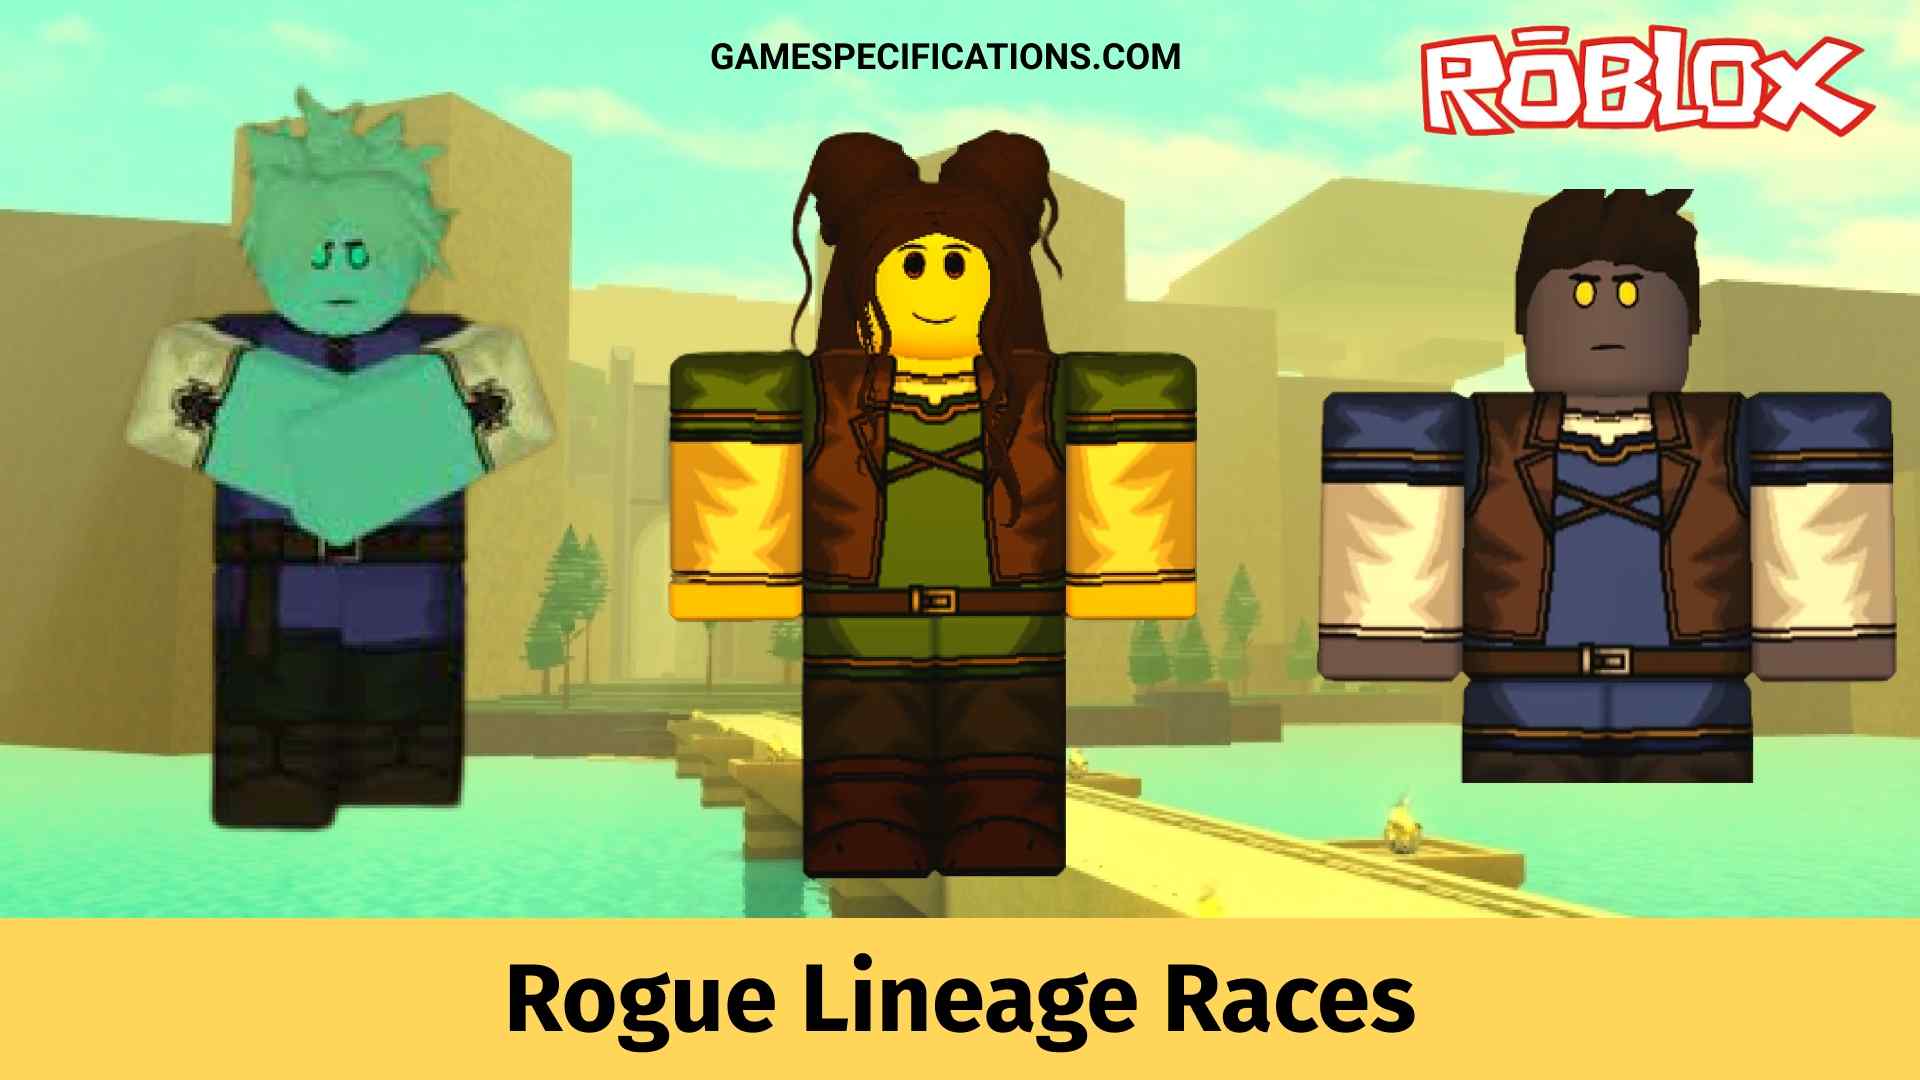 Rogue Lineage Codes - May 2021 - Mejoress